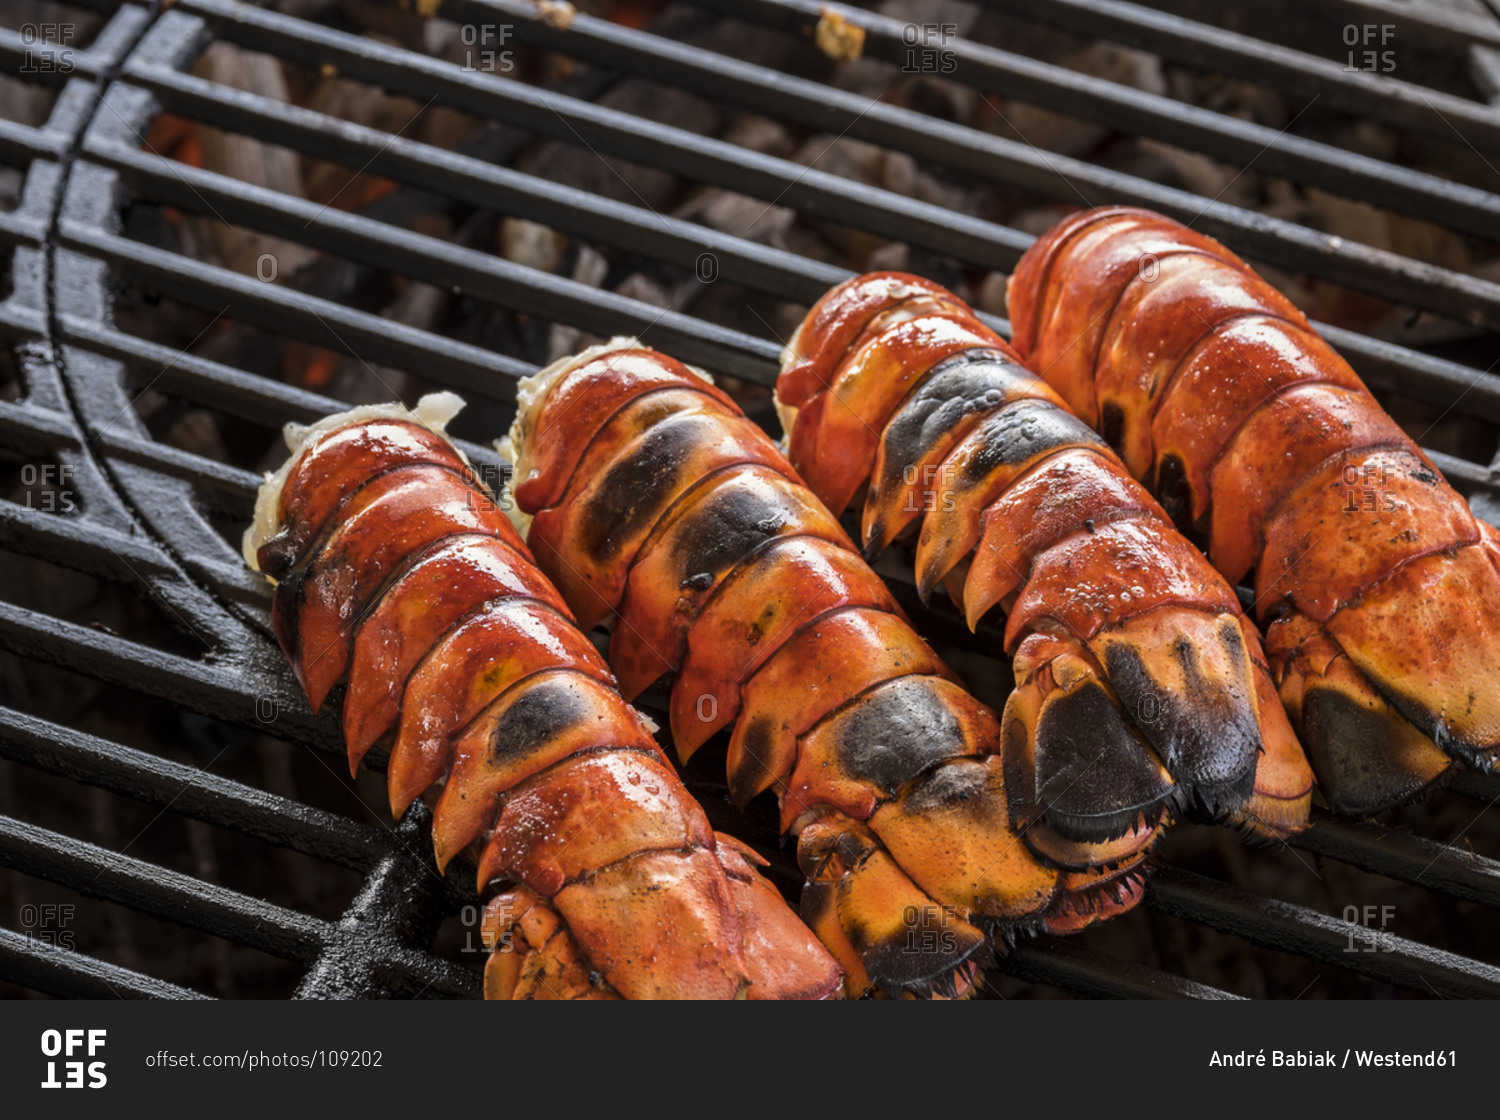 Lobster tails cooking over charcoal on barbecue grill